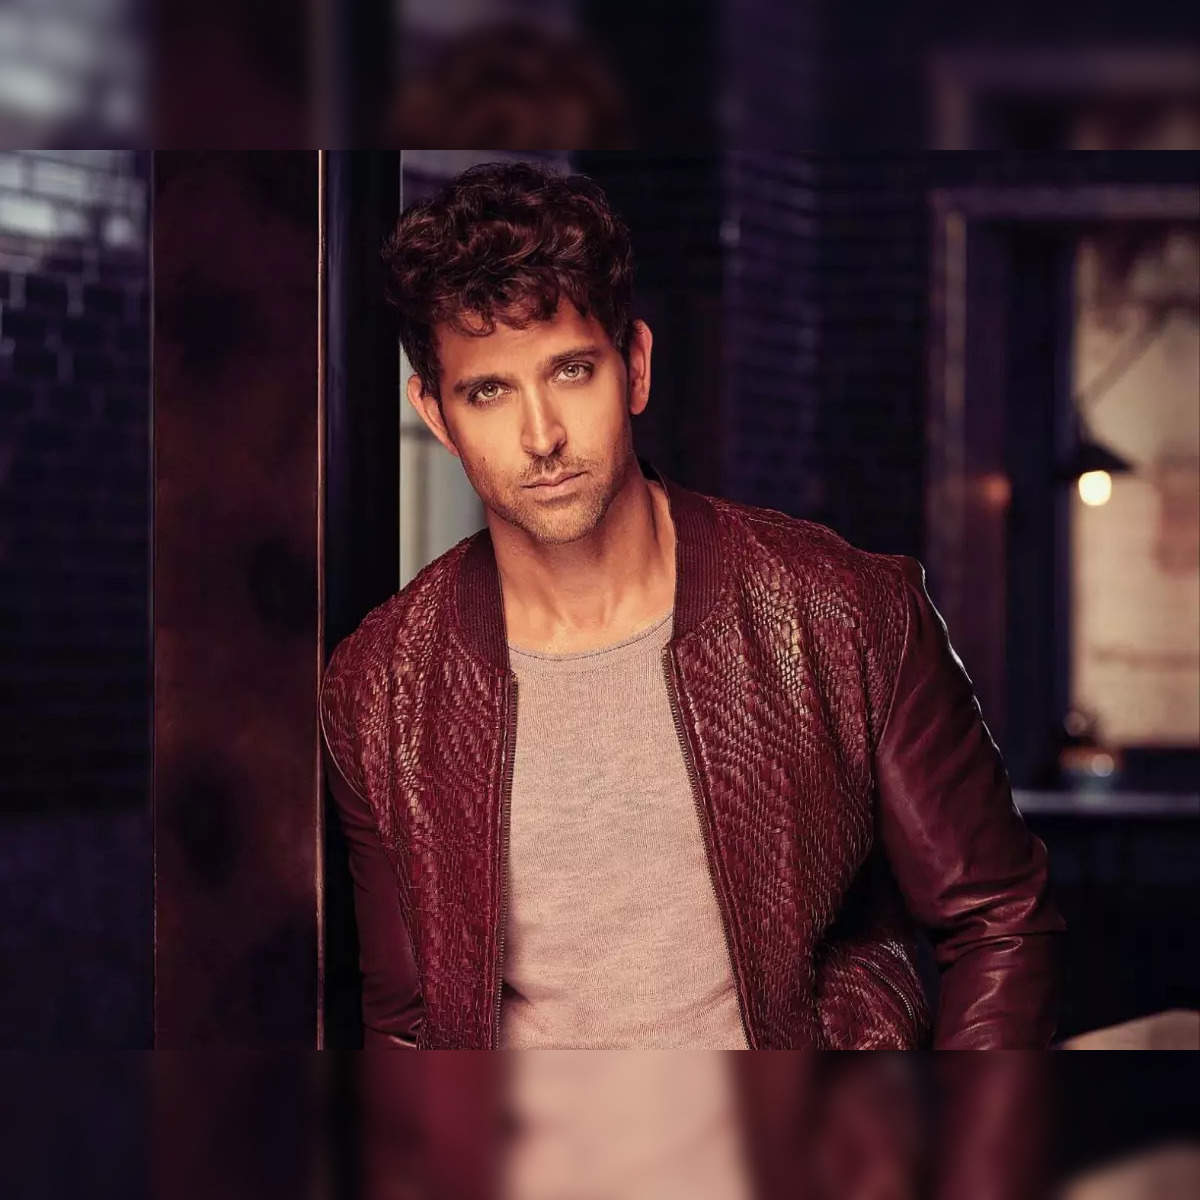 Hrithik Roshan: International Dance Day 2023: Hrithik Roshan meets 8 dance  influencers, says he is inspired - The Economic Times